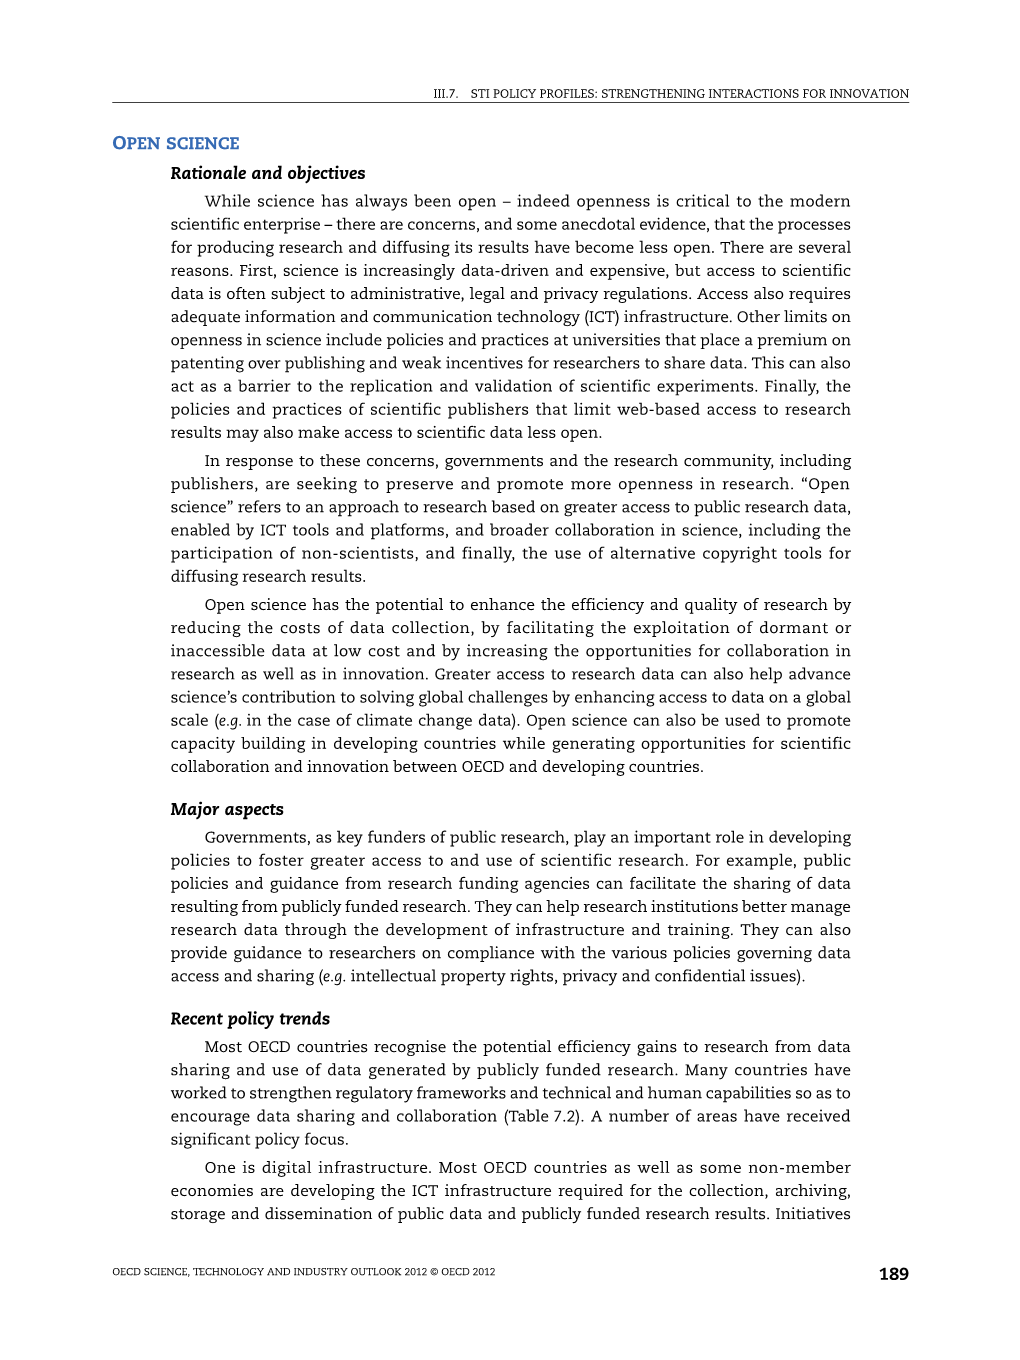 189 OPEN SCIENCE Rationale and Objectives Major Aspects Recent